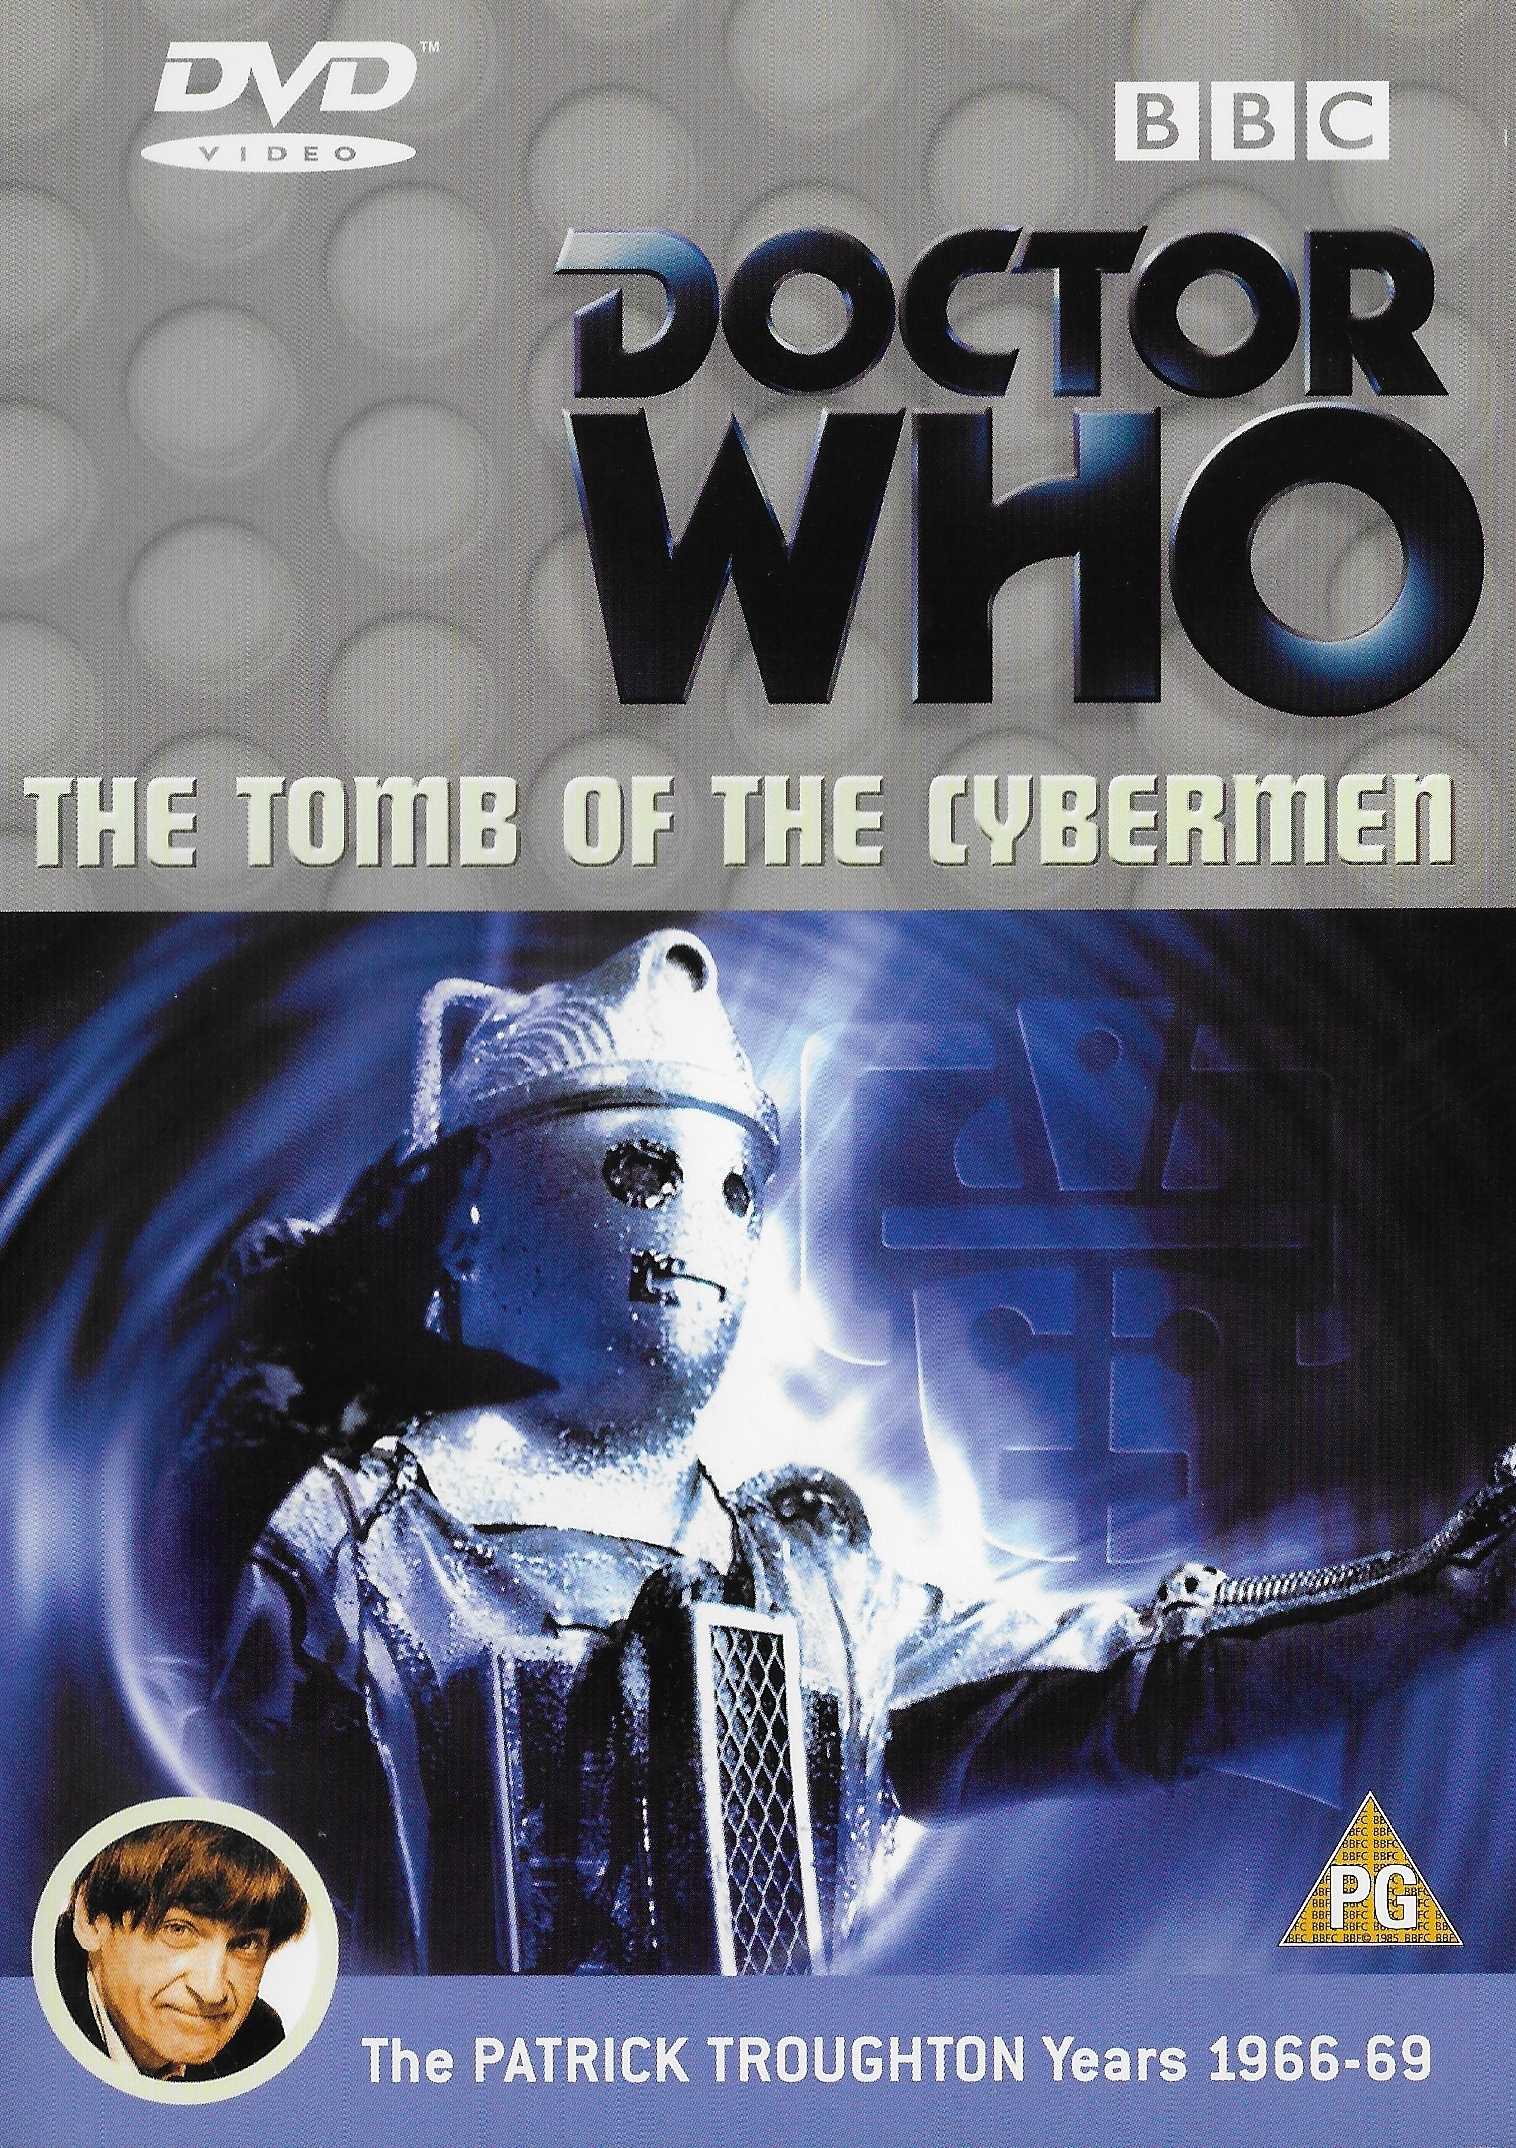 Picture of BBCDVD 1032 Doctor Who - The tomb of the Cybermen by artist Kit Pedler / Gerry Davis from the BBC records and Tapes library